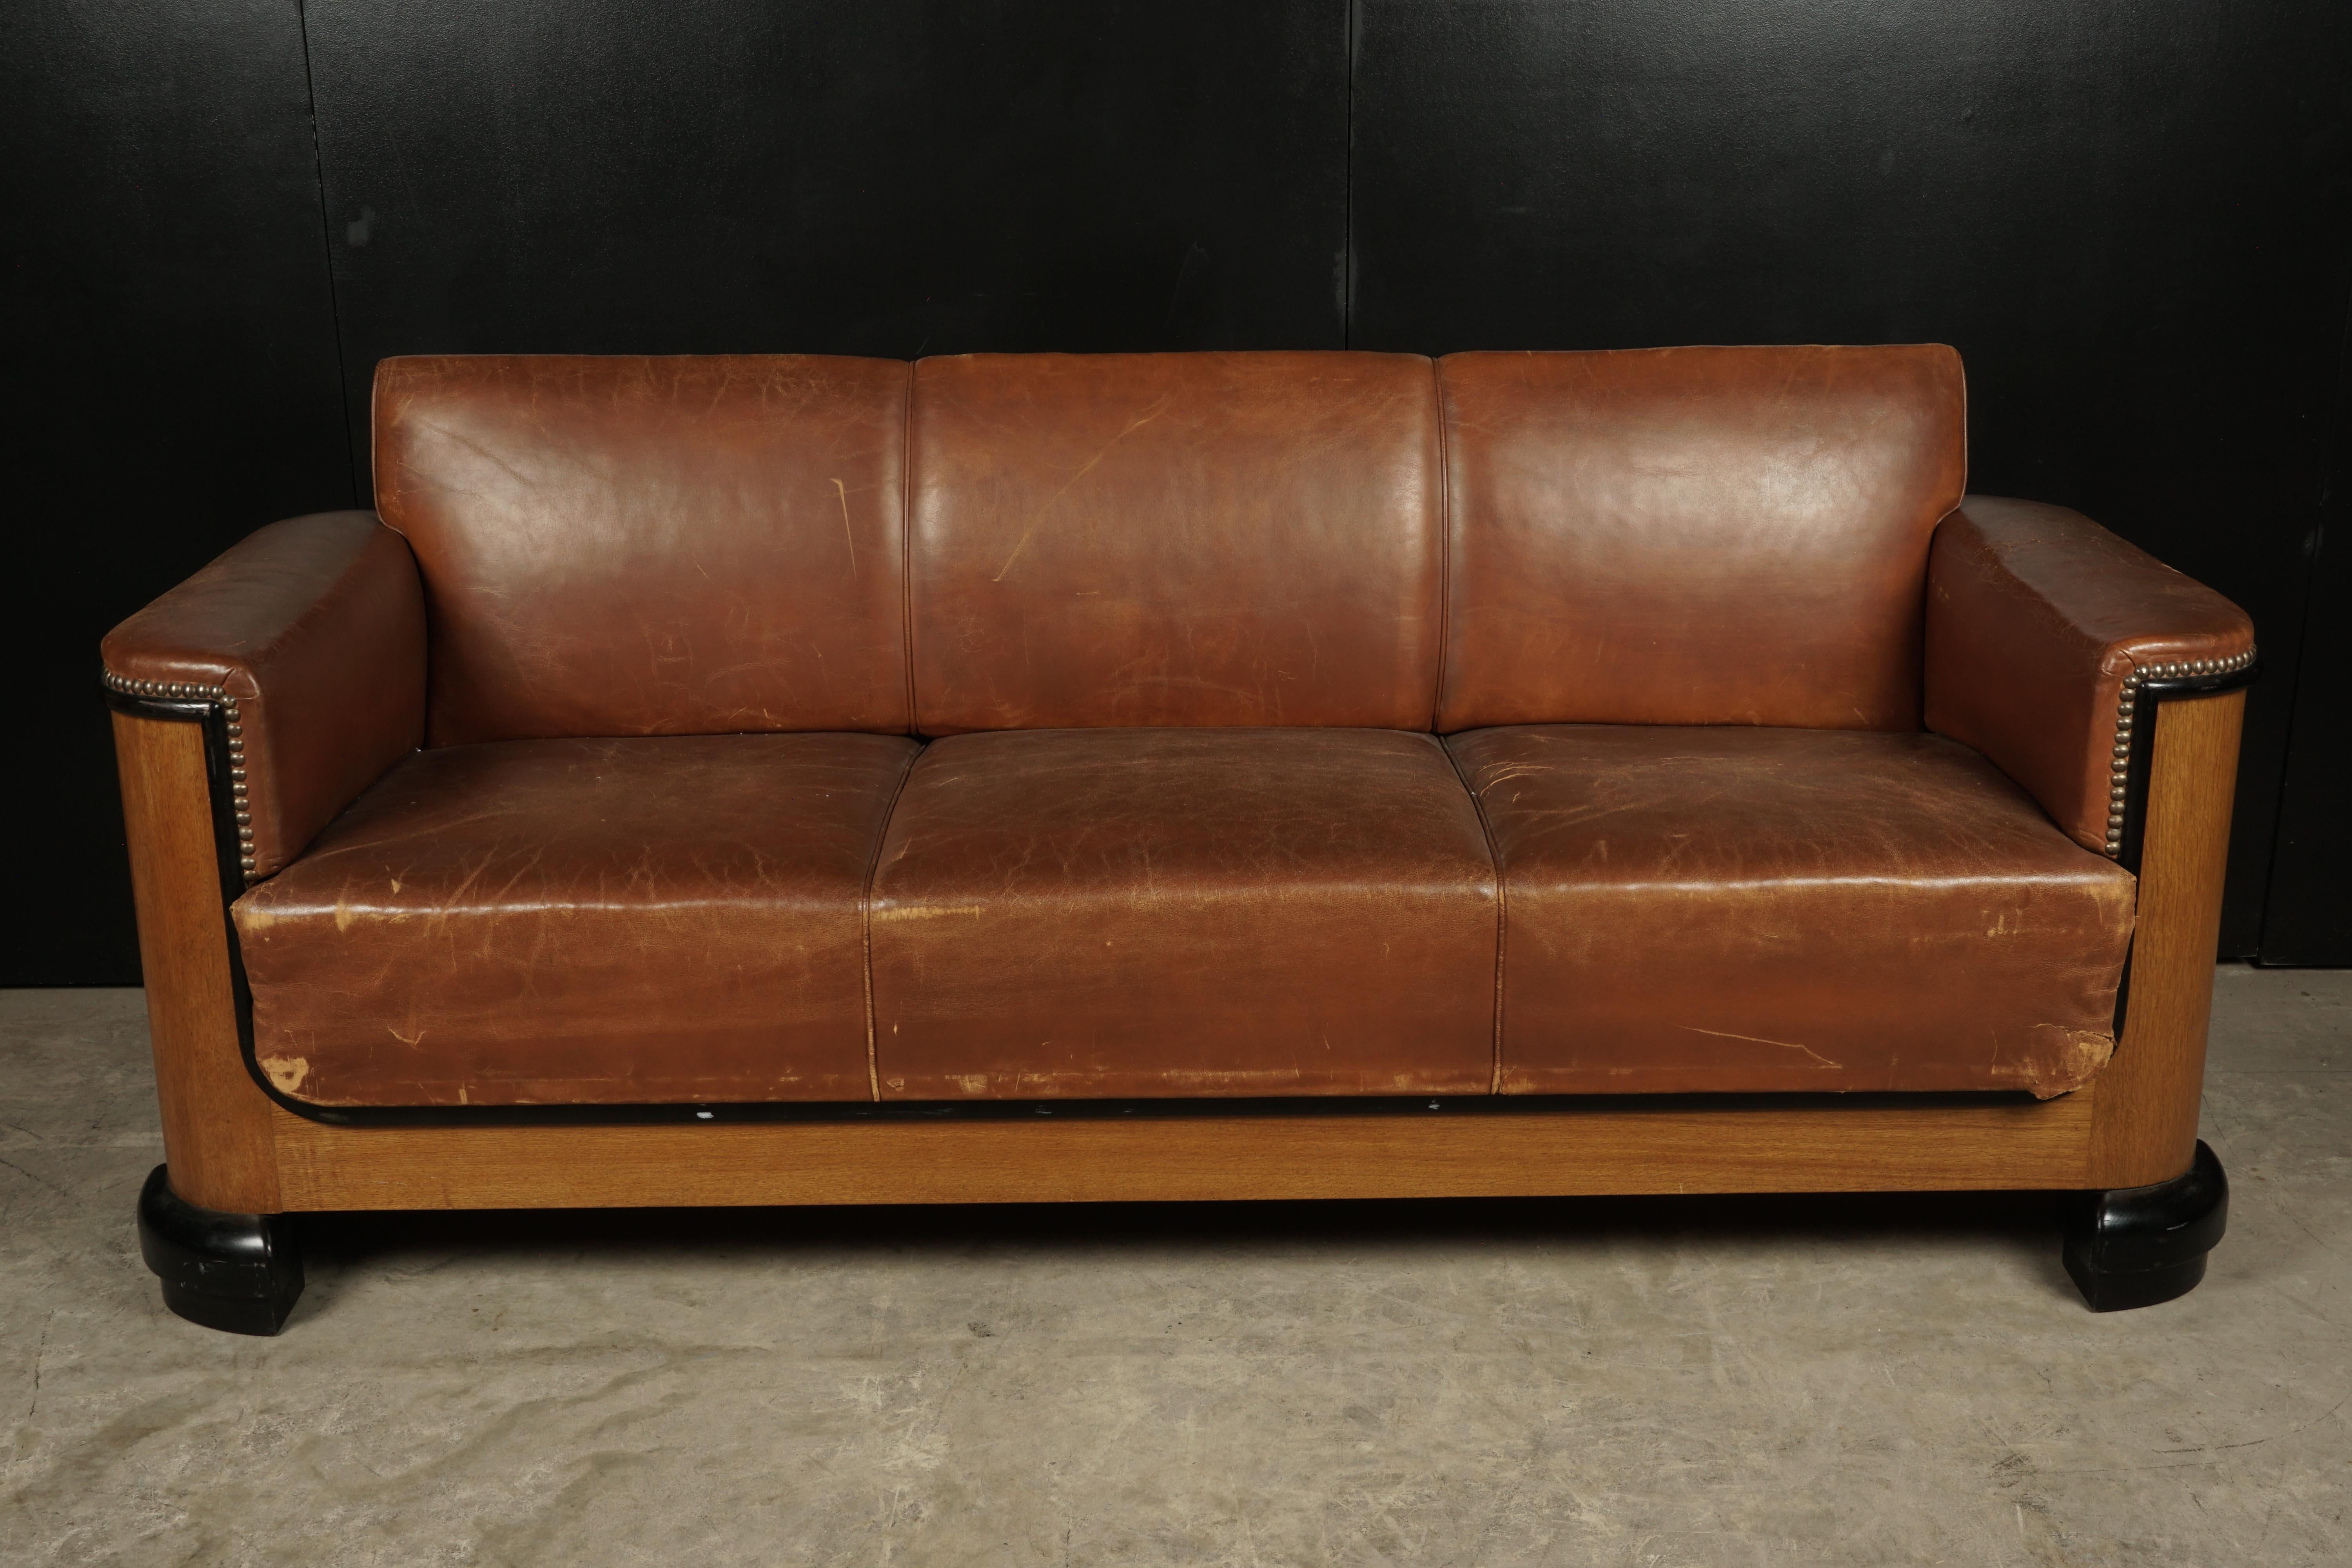 Art Deco leather sofa from Denmark, circa 1940. Original brown leather upholstery. Sides and base of oak with black lacquered feet.